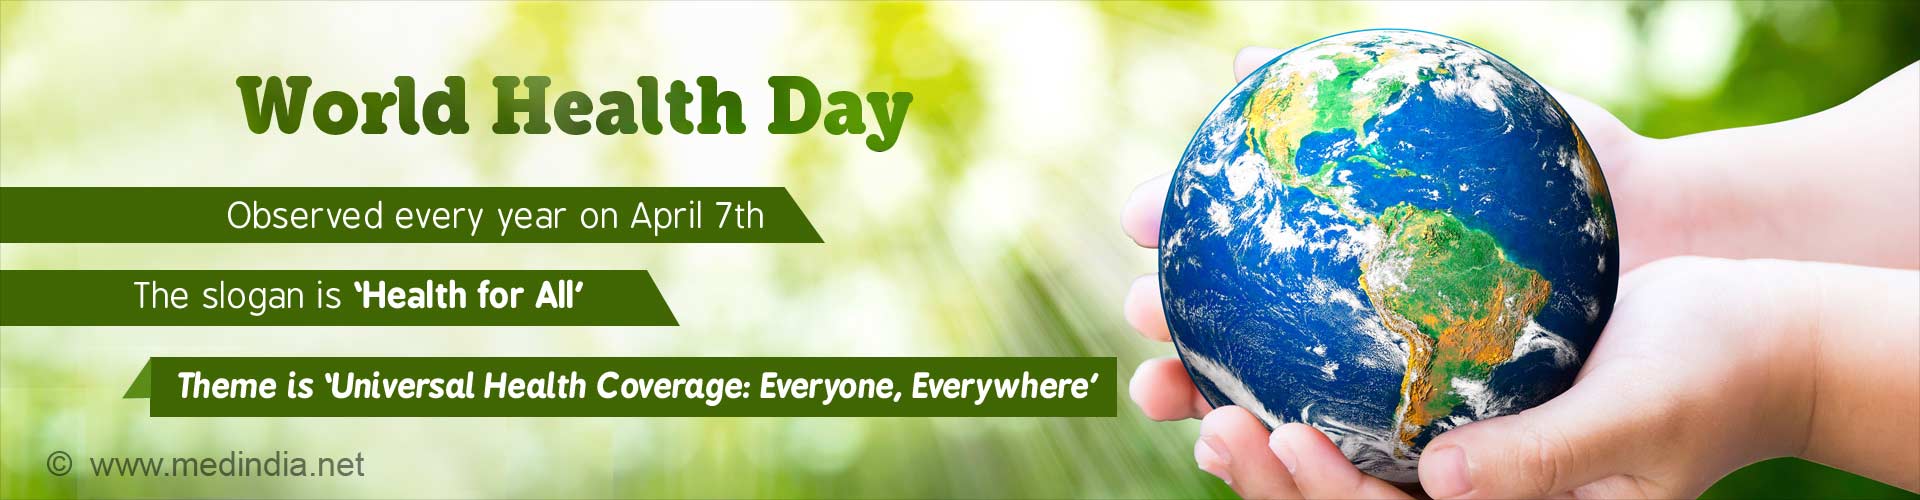 Worl Health Day
- observed every year on April 7th
- The slogan is 